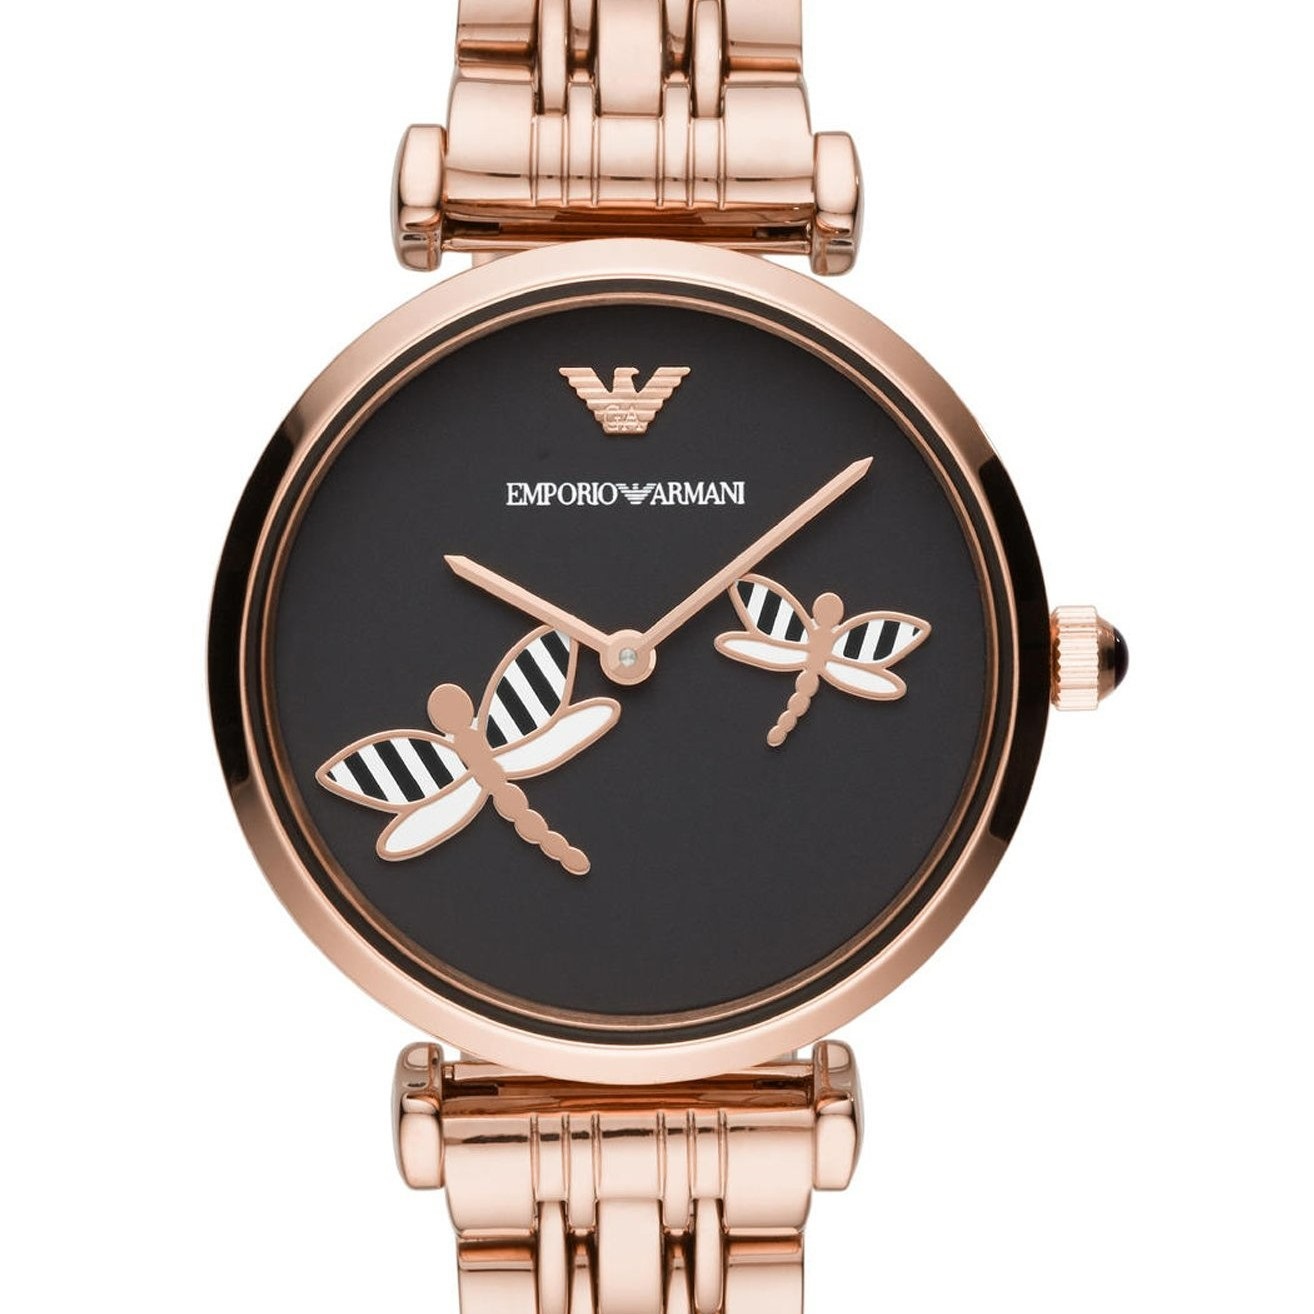 ĐỒNG HỒ NỮ EMPORIO ARMANI DRAGONFLY GIANNI T-BAR AR11206 BLACK DIAL WATCH FOR WOMEN 11